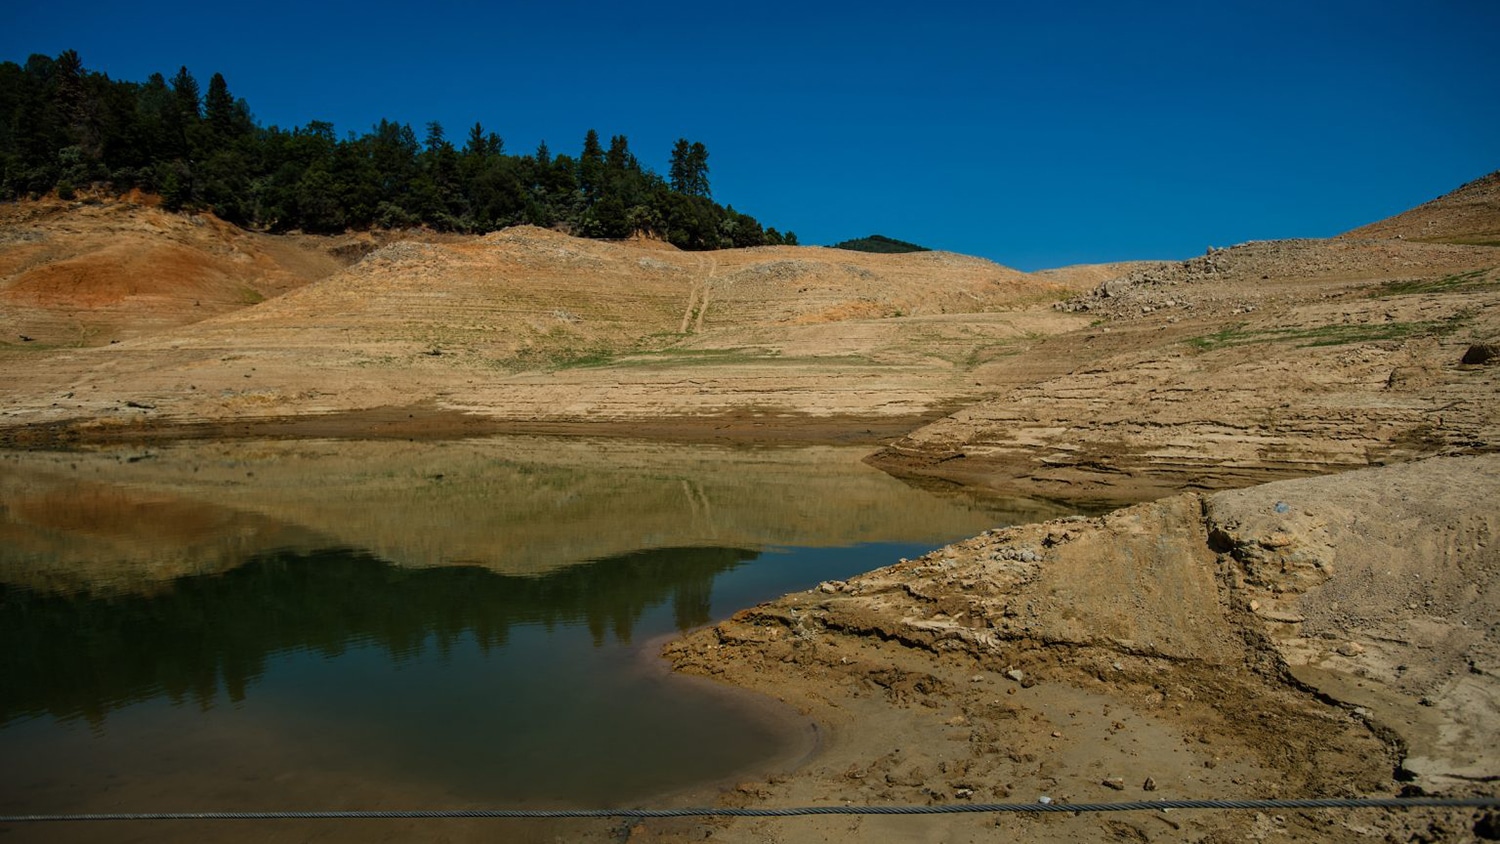 Shasta Lake during a drought in California - Drought, Heat Waves Worsen West Coast Air Pollution Inequality - College of Natural Resources NC State University